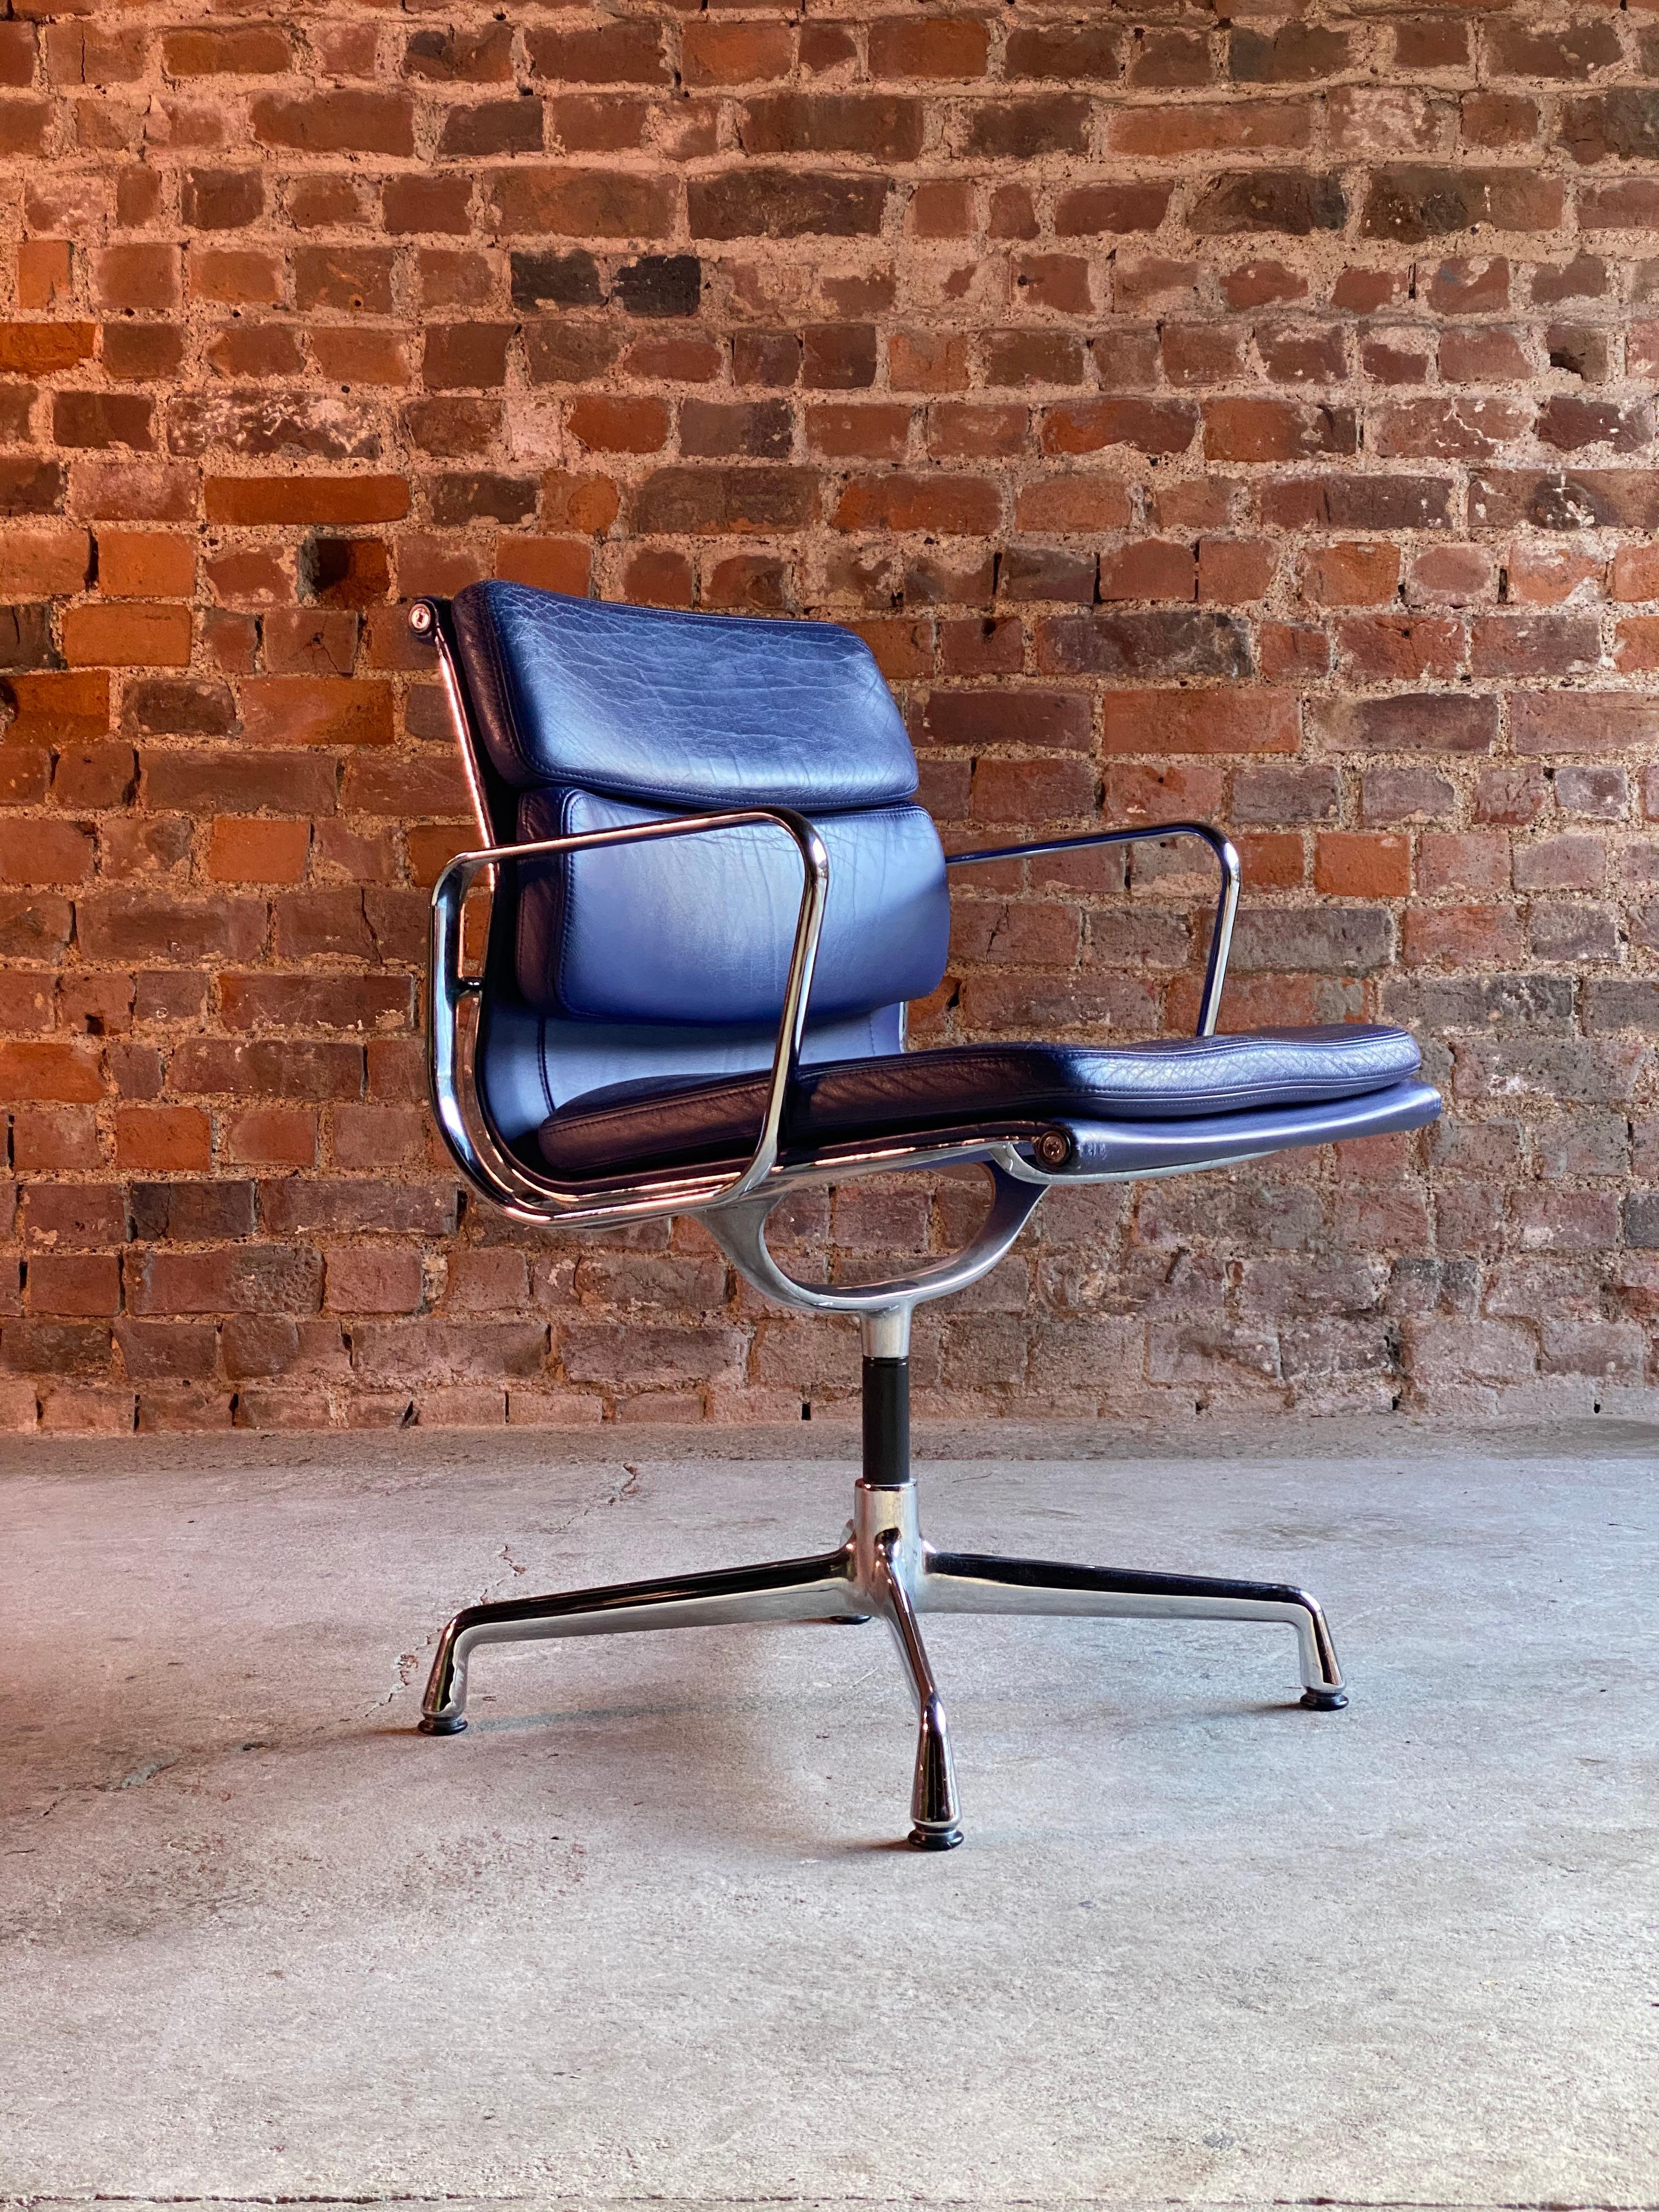 Eames Soft Pad Group EA208 by Vitra Charles & Ray Eames, circa 2000

Eames Soft Pad Chair EA 208 by Vitra, this is a swivel version in blue leather raised on chrome base, the leather shows signs of use but with no tears or rips, a beautiful chair